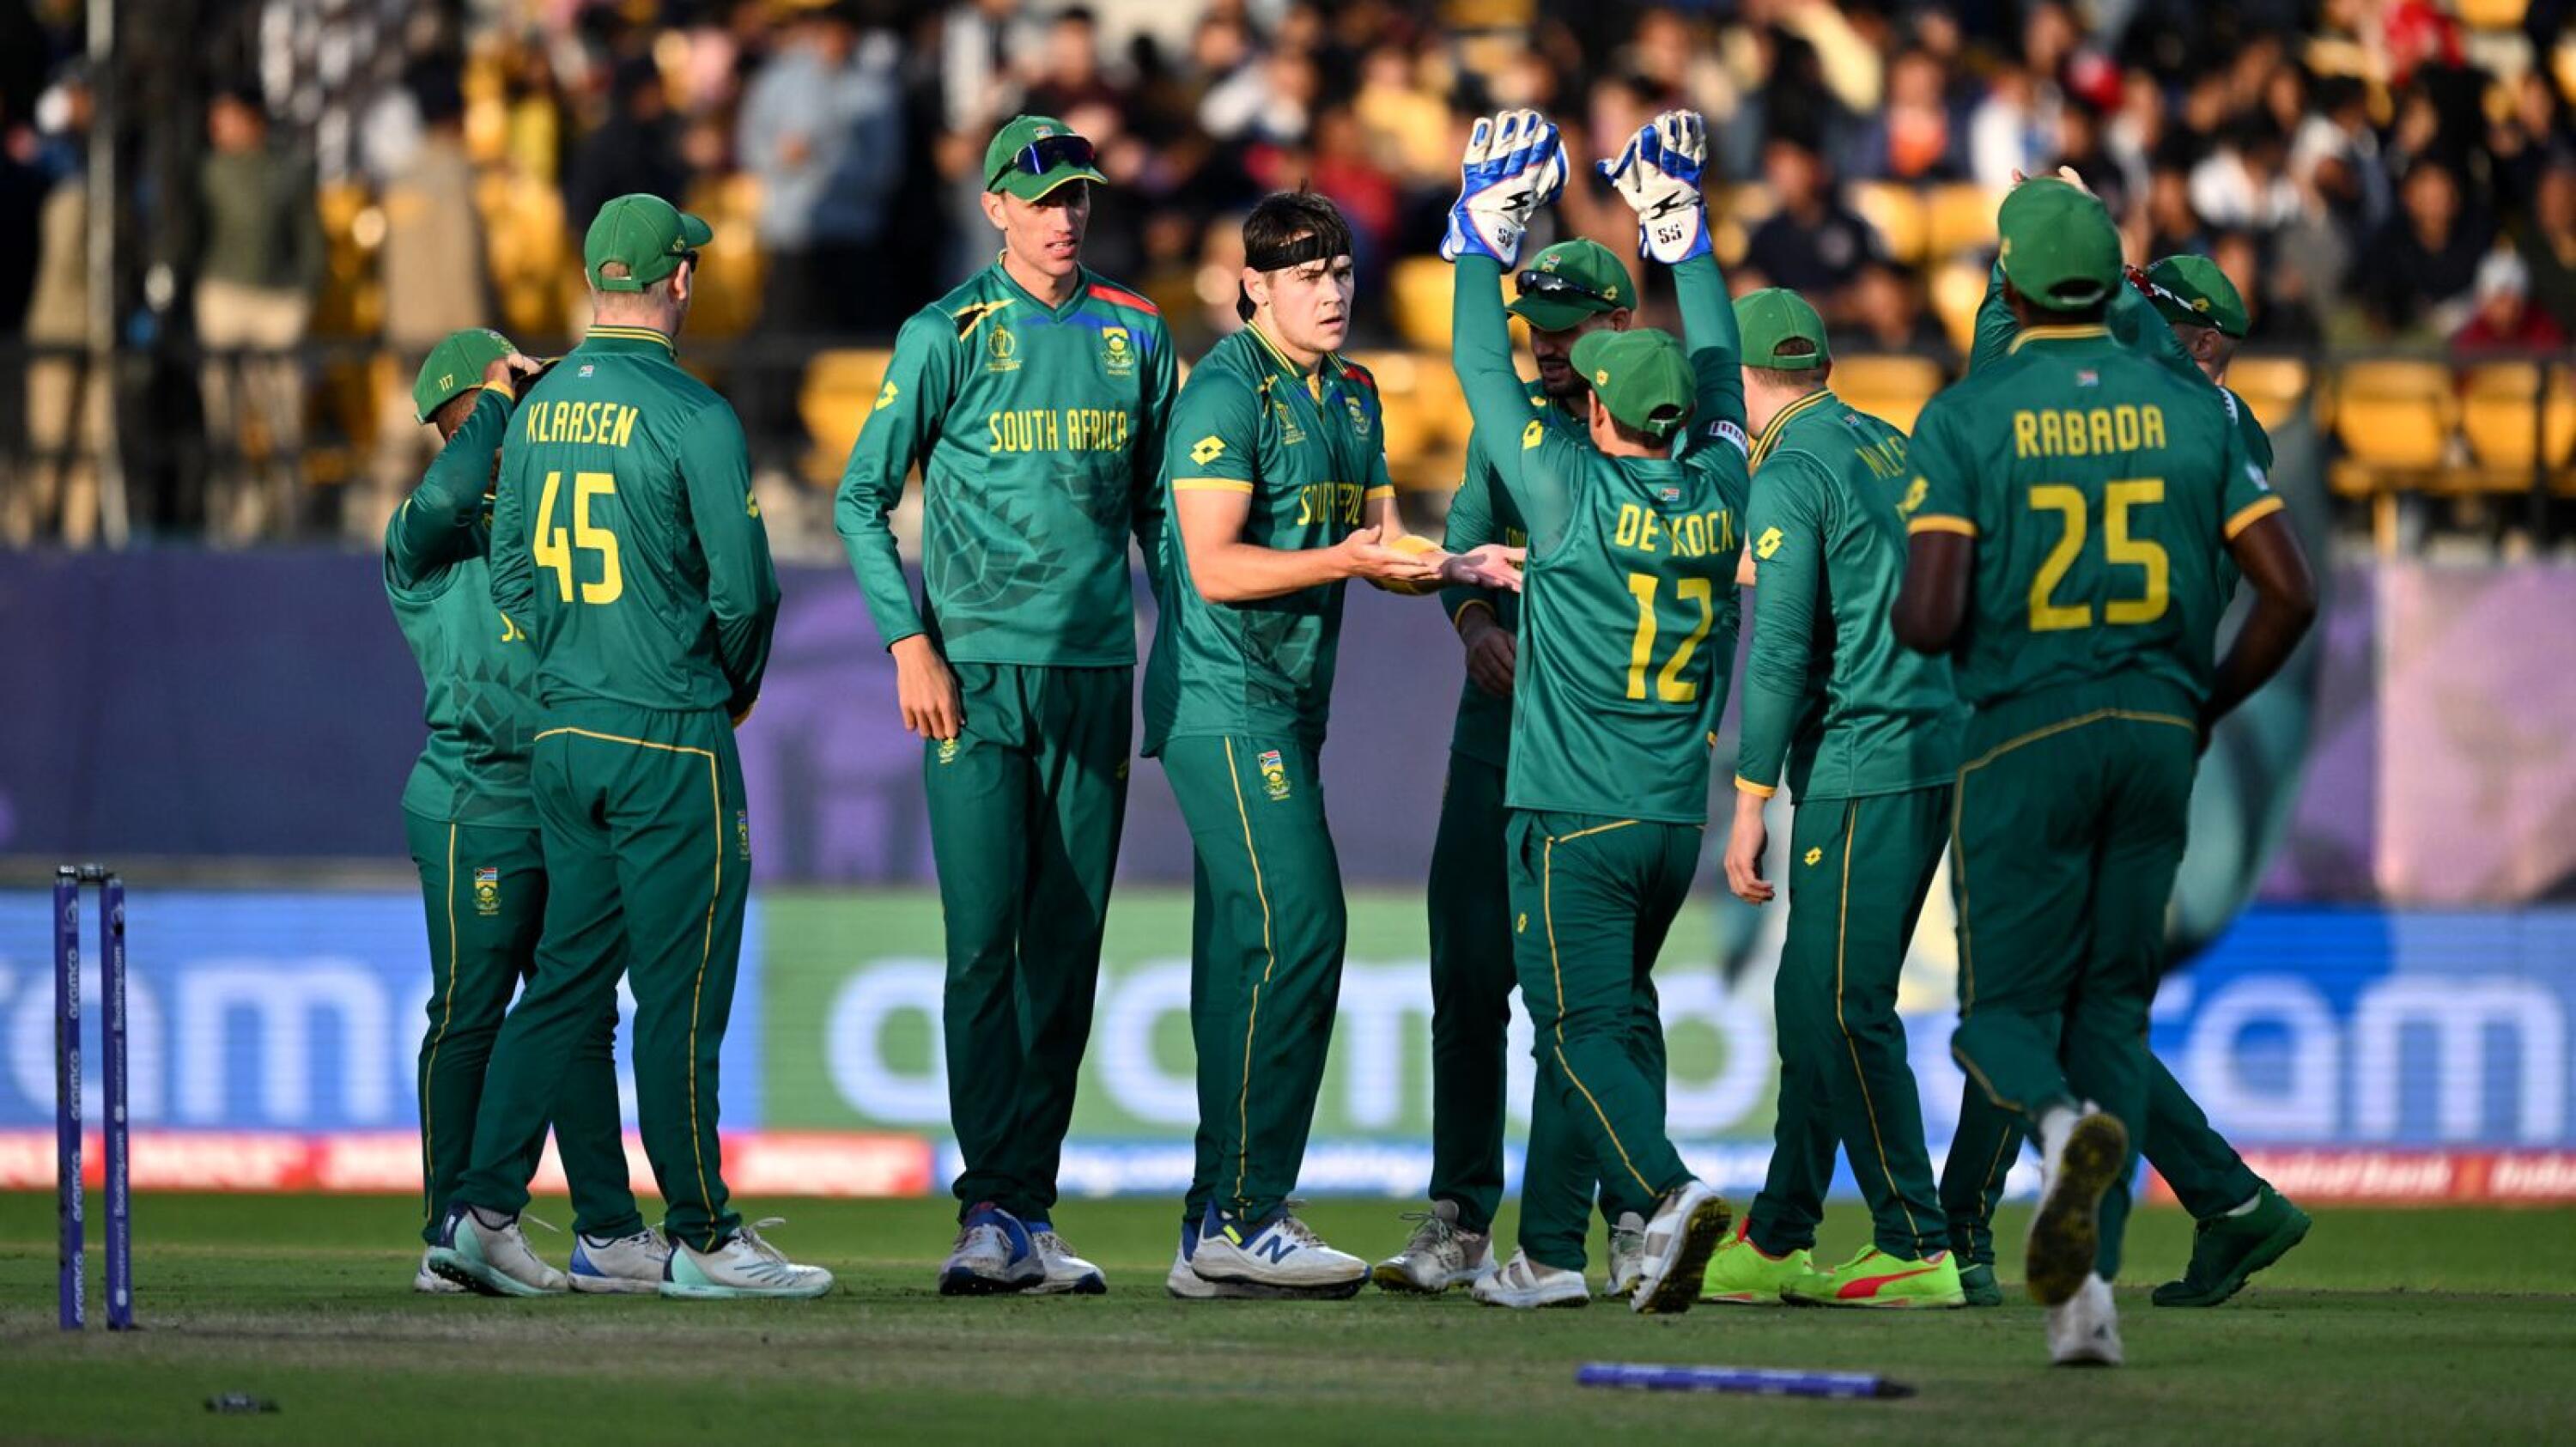 Proteas bowler Gerald Coetzee (C) celebrates with teammates after taking the wicket of Netherlands' Colin Ackermann